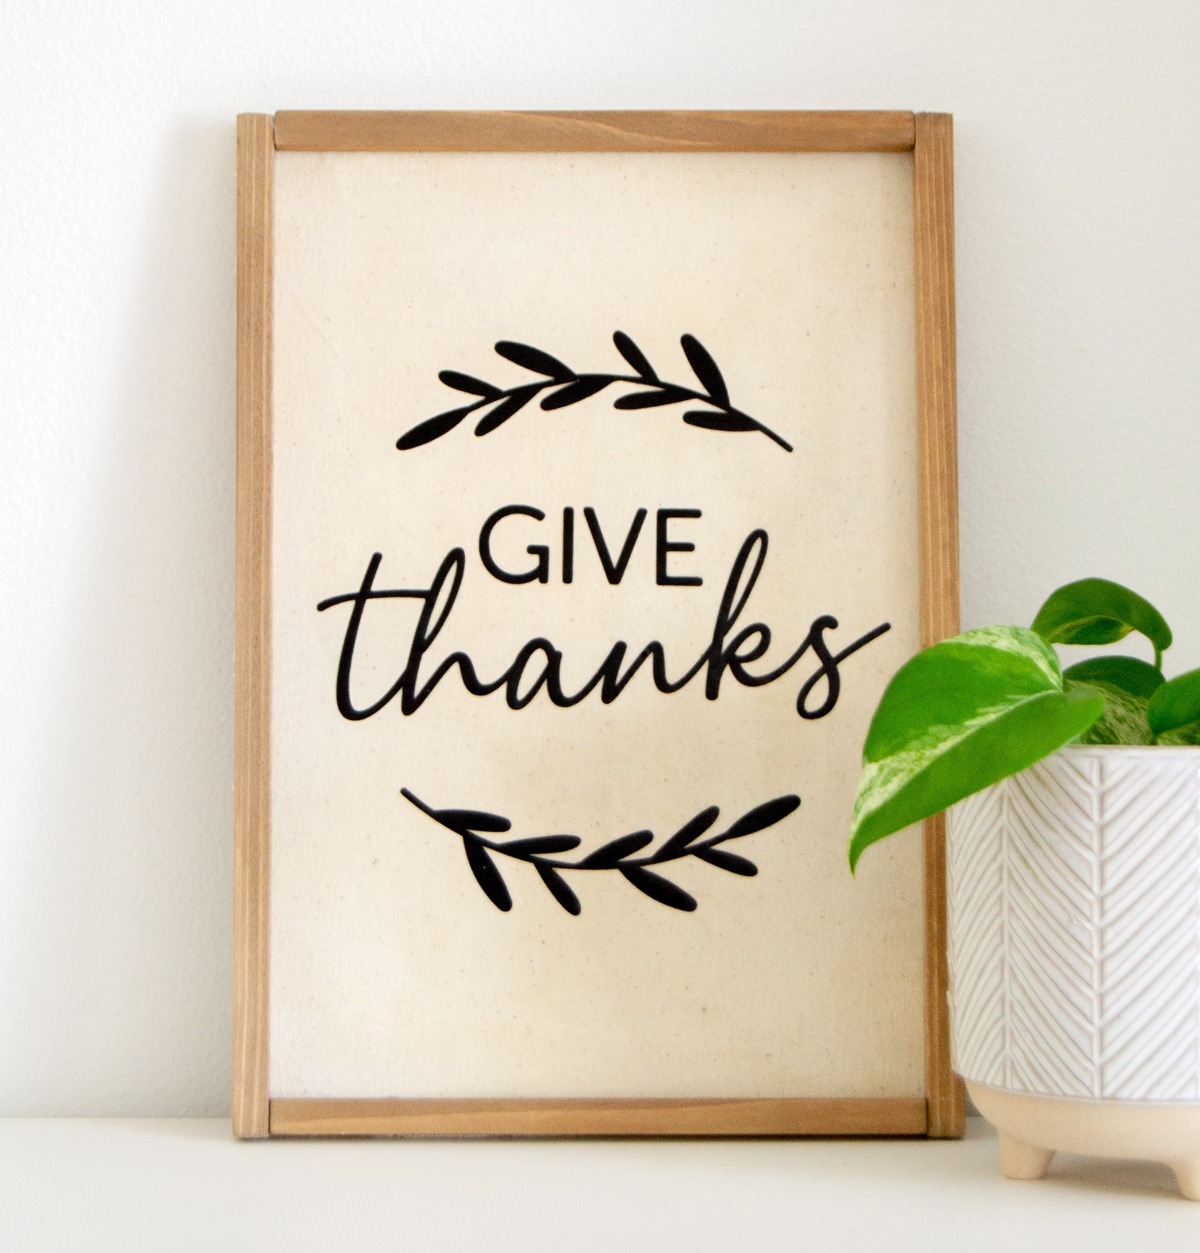 Make a simple Thanksgiving sign